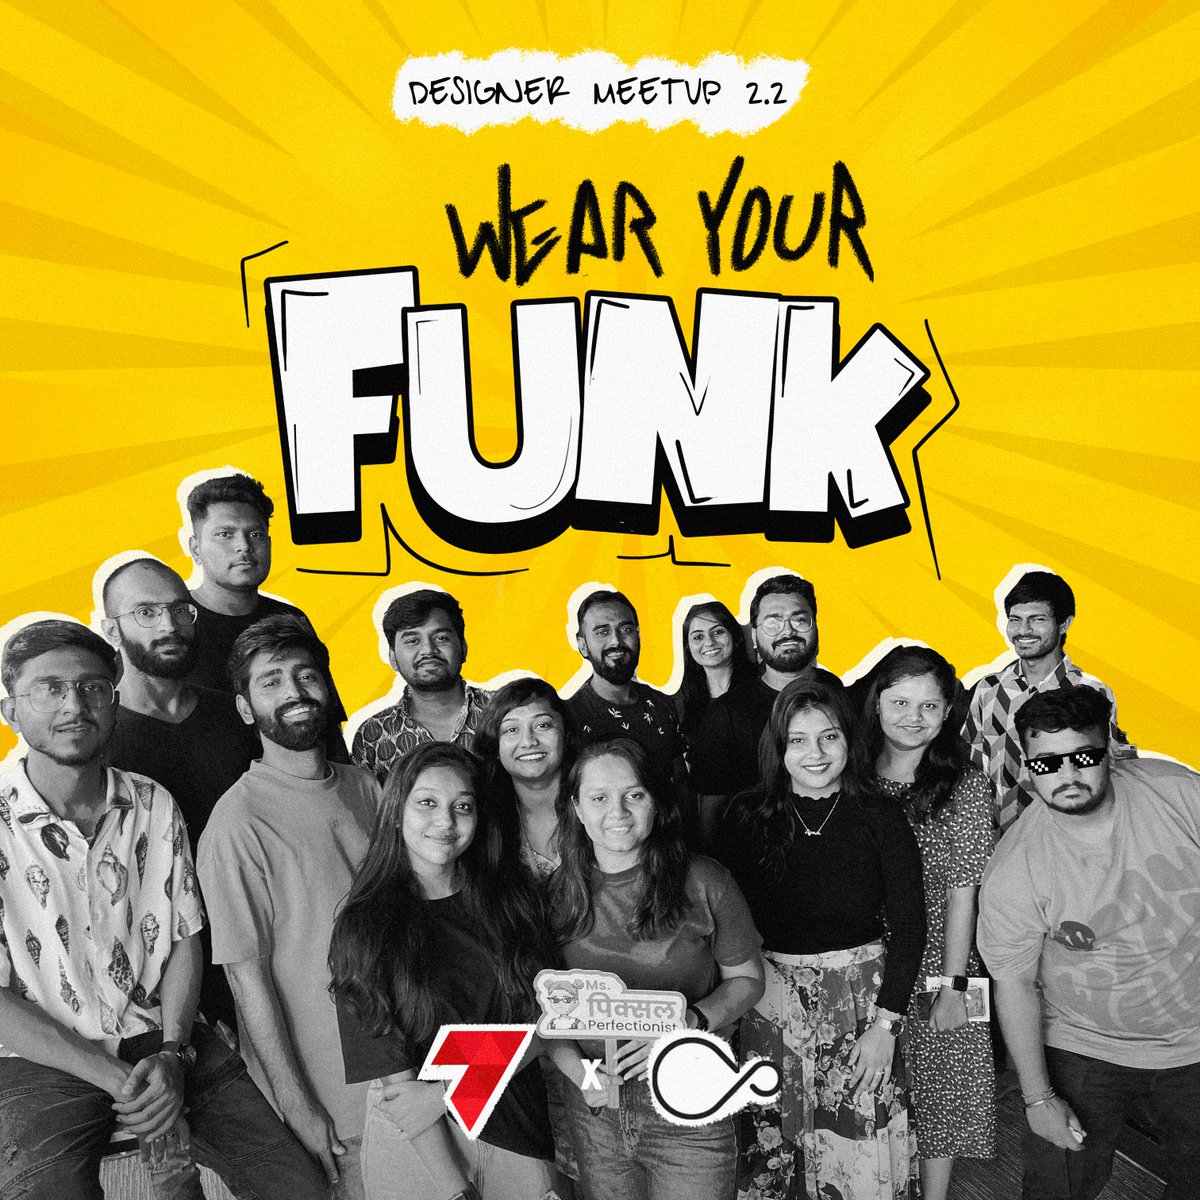 Wear your funk 😉 Wear your cool😍 See you tomorrow at the most buzzing Design Event in Ahmedabad by @SandcupStudio 🚀 #designmeetup #designers #design #designlife #meetup #ahmedabad